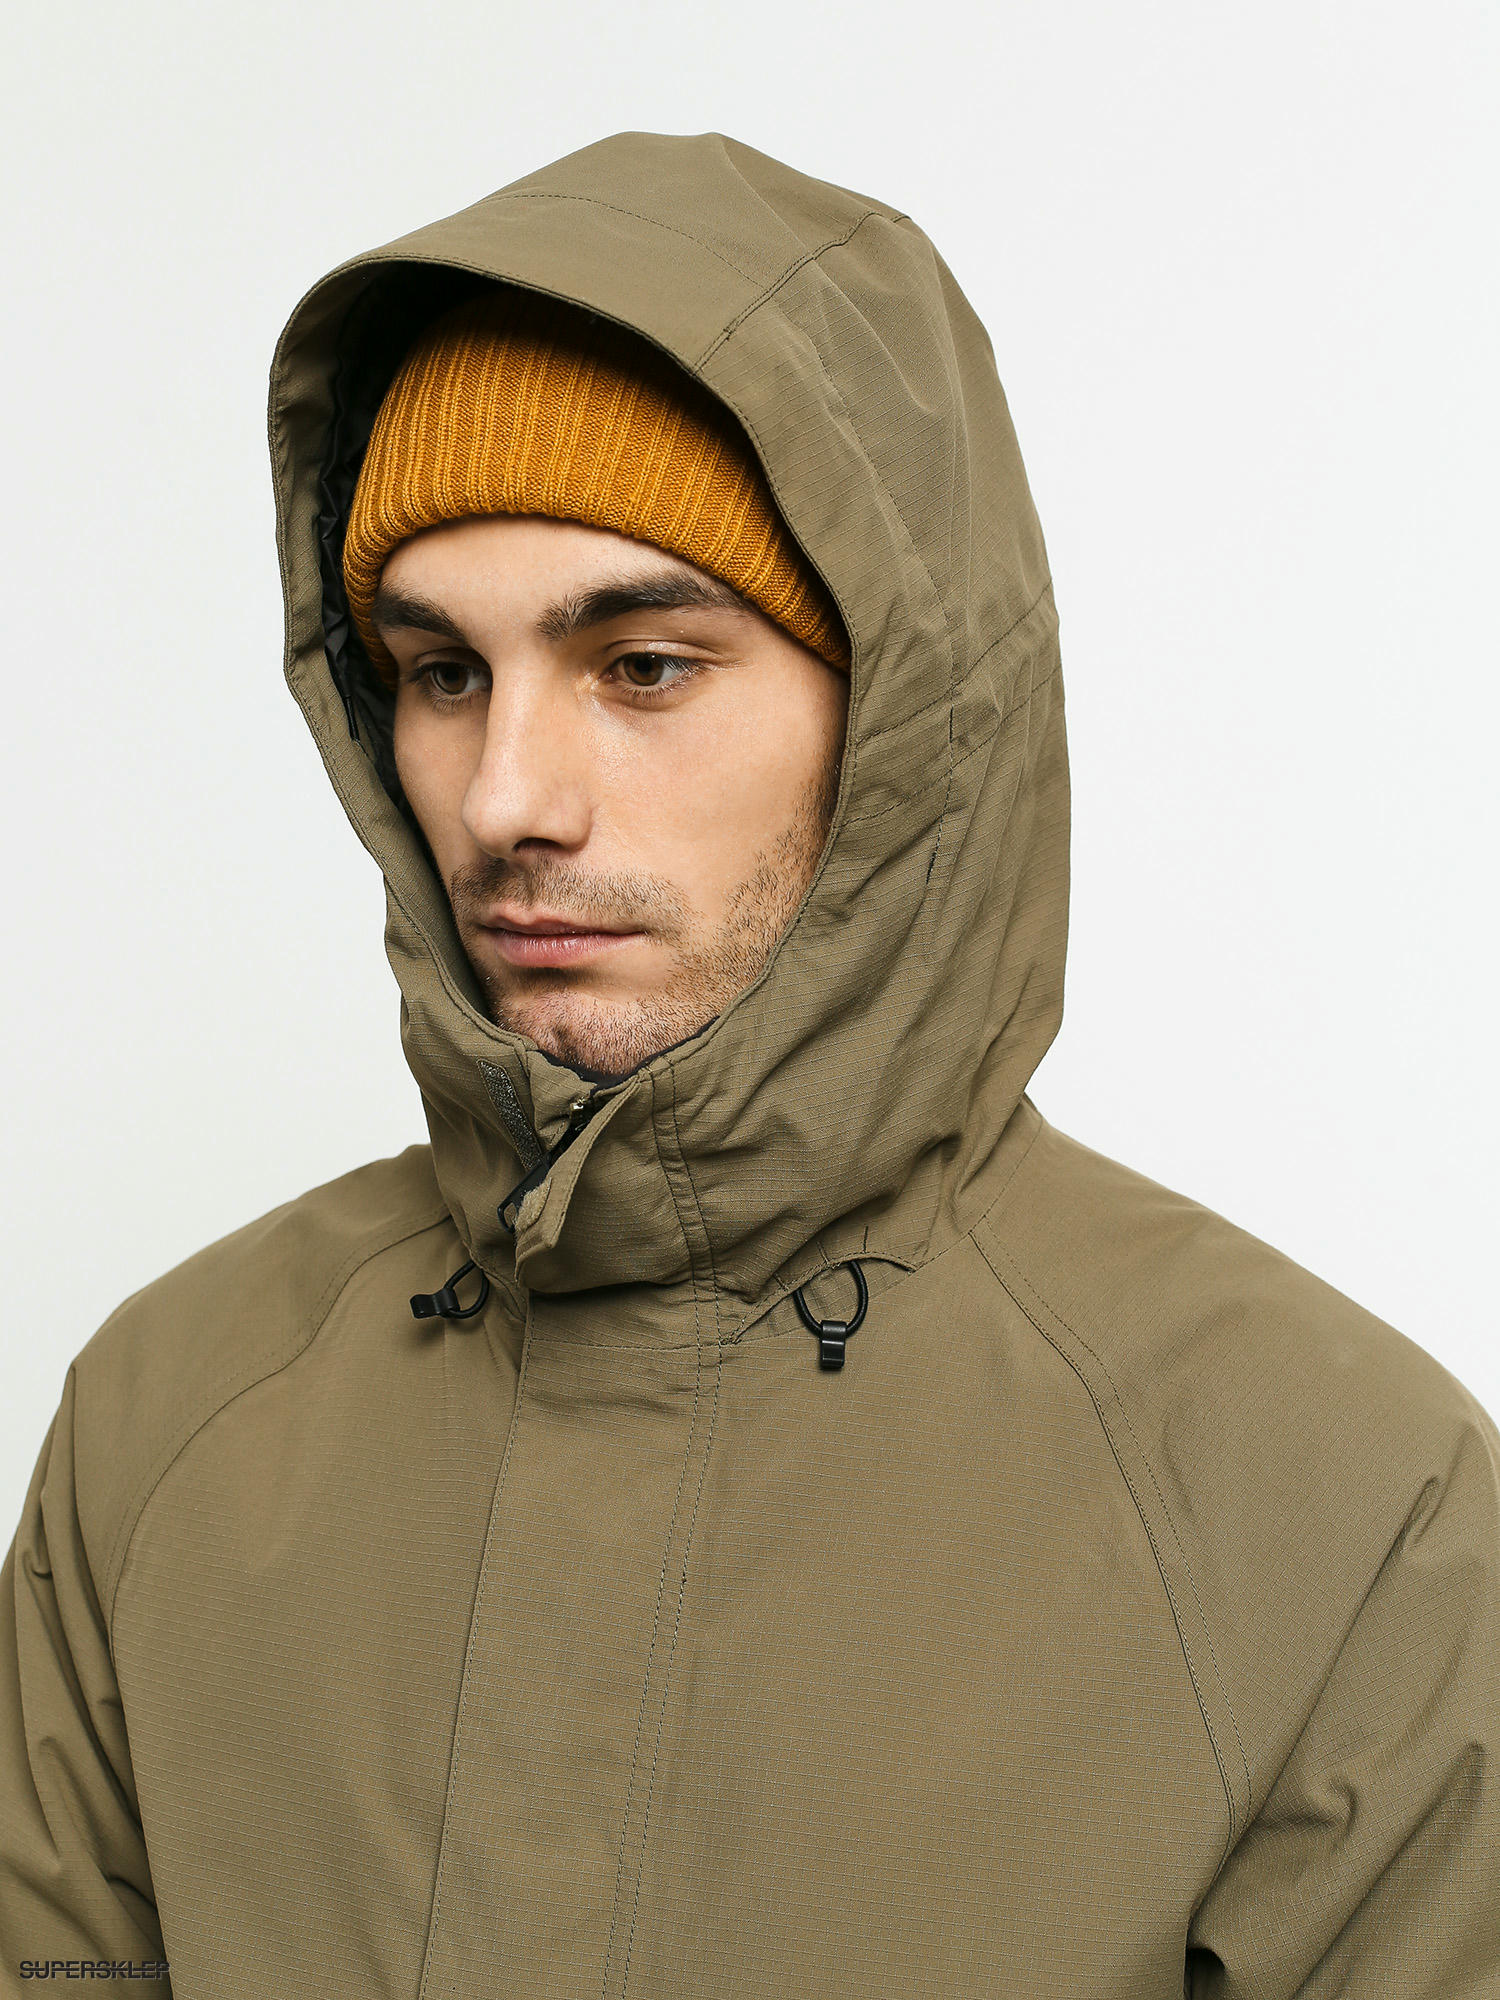 Buy > thirtytwo lodger parka > in stock